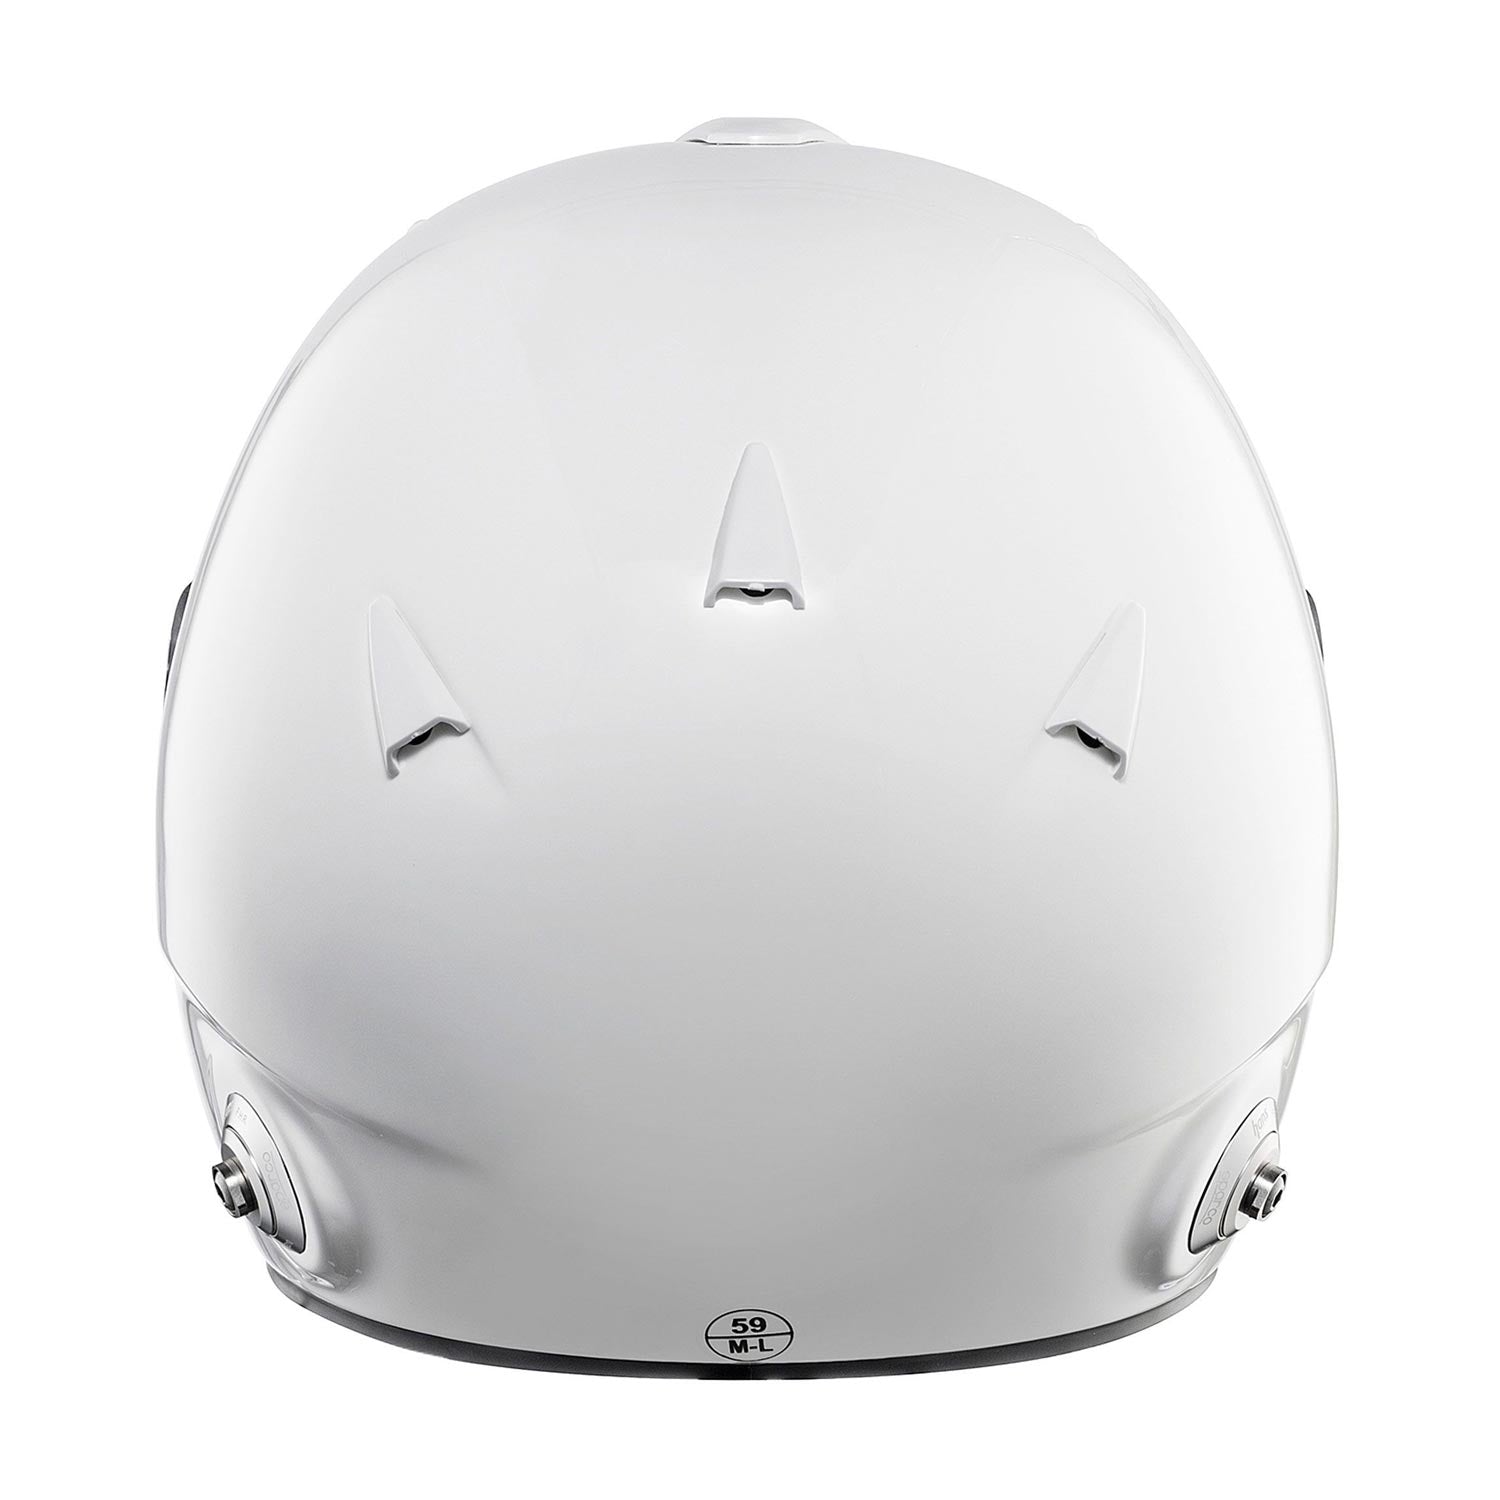 SPARCO 003375BIRS2M RF-5W Racing helmet, FIA/SNELL SA2020, white/red, size M (57-58) Photo-1 